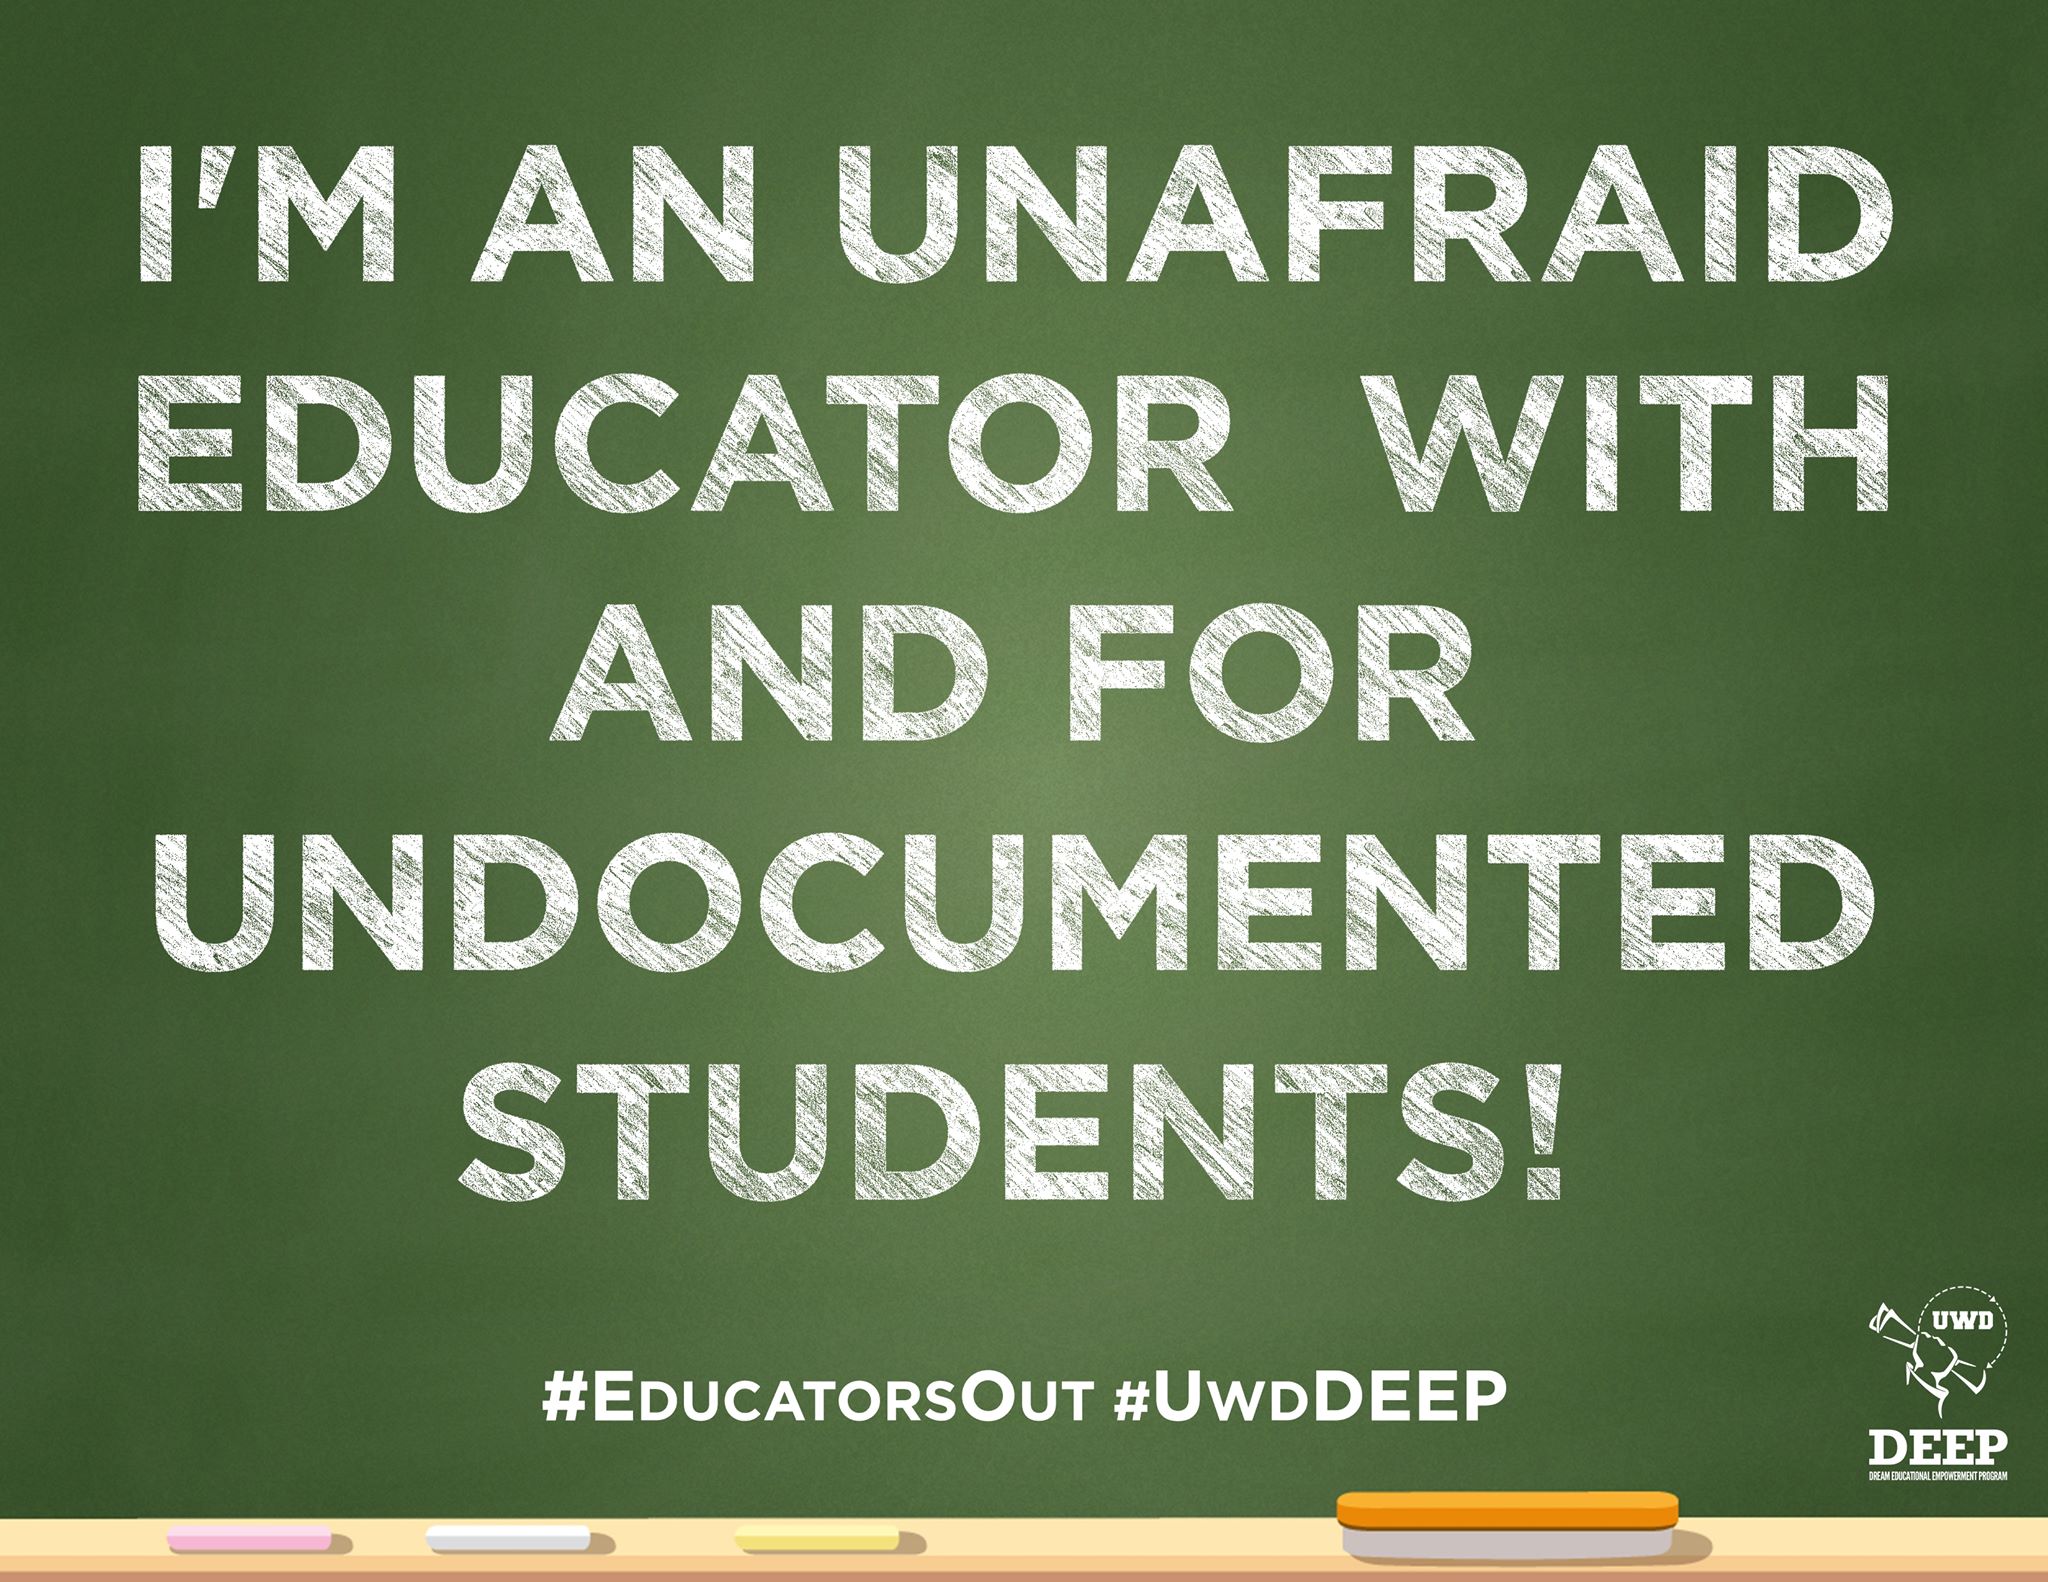 Chalk board that says "I'm an unafraid educator with and for undocumented students!"